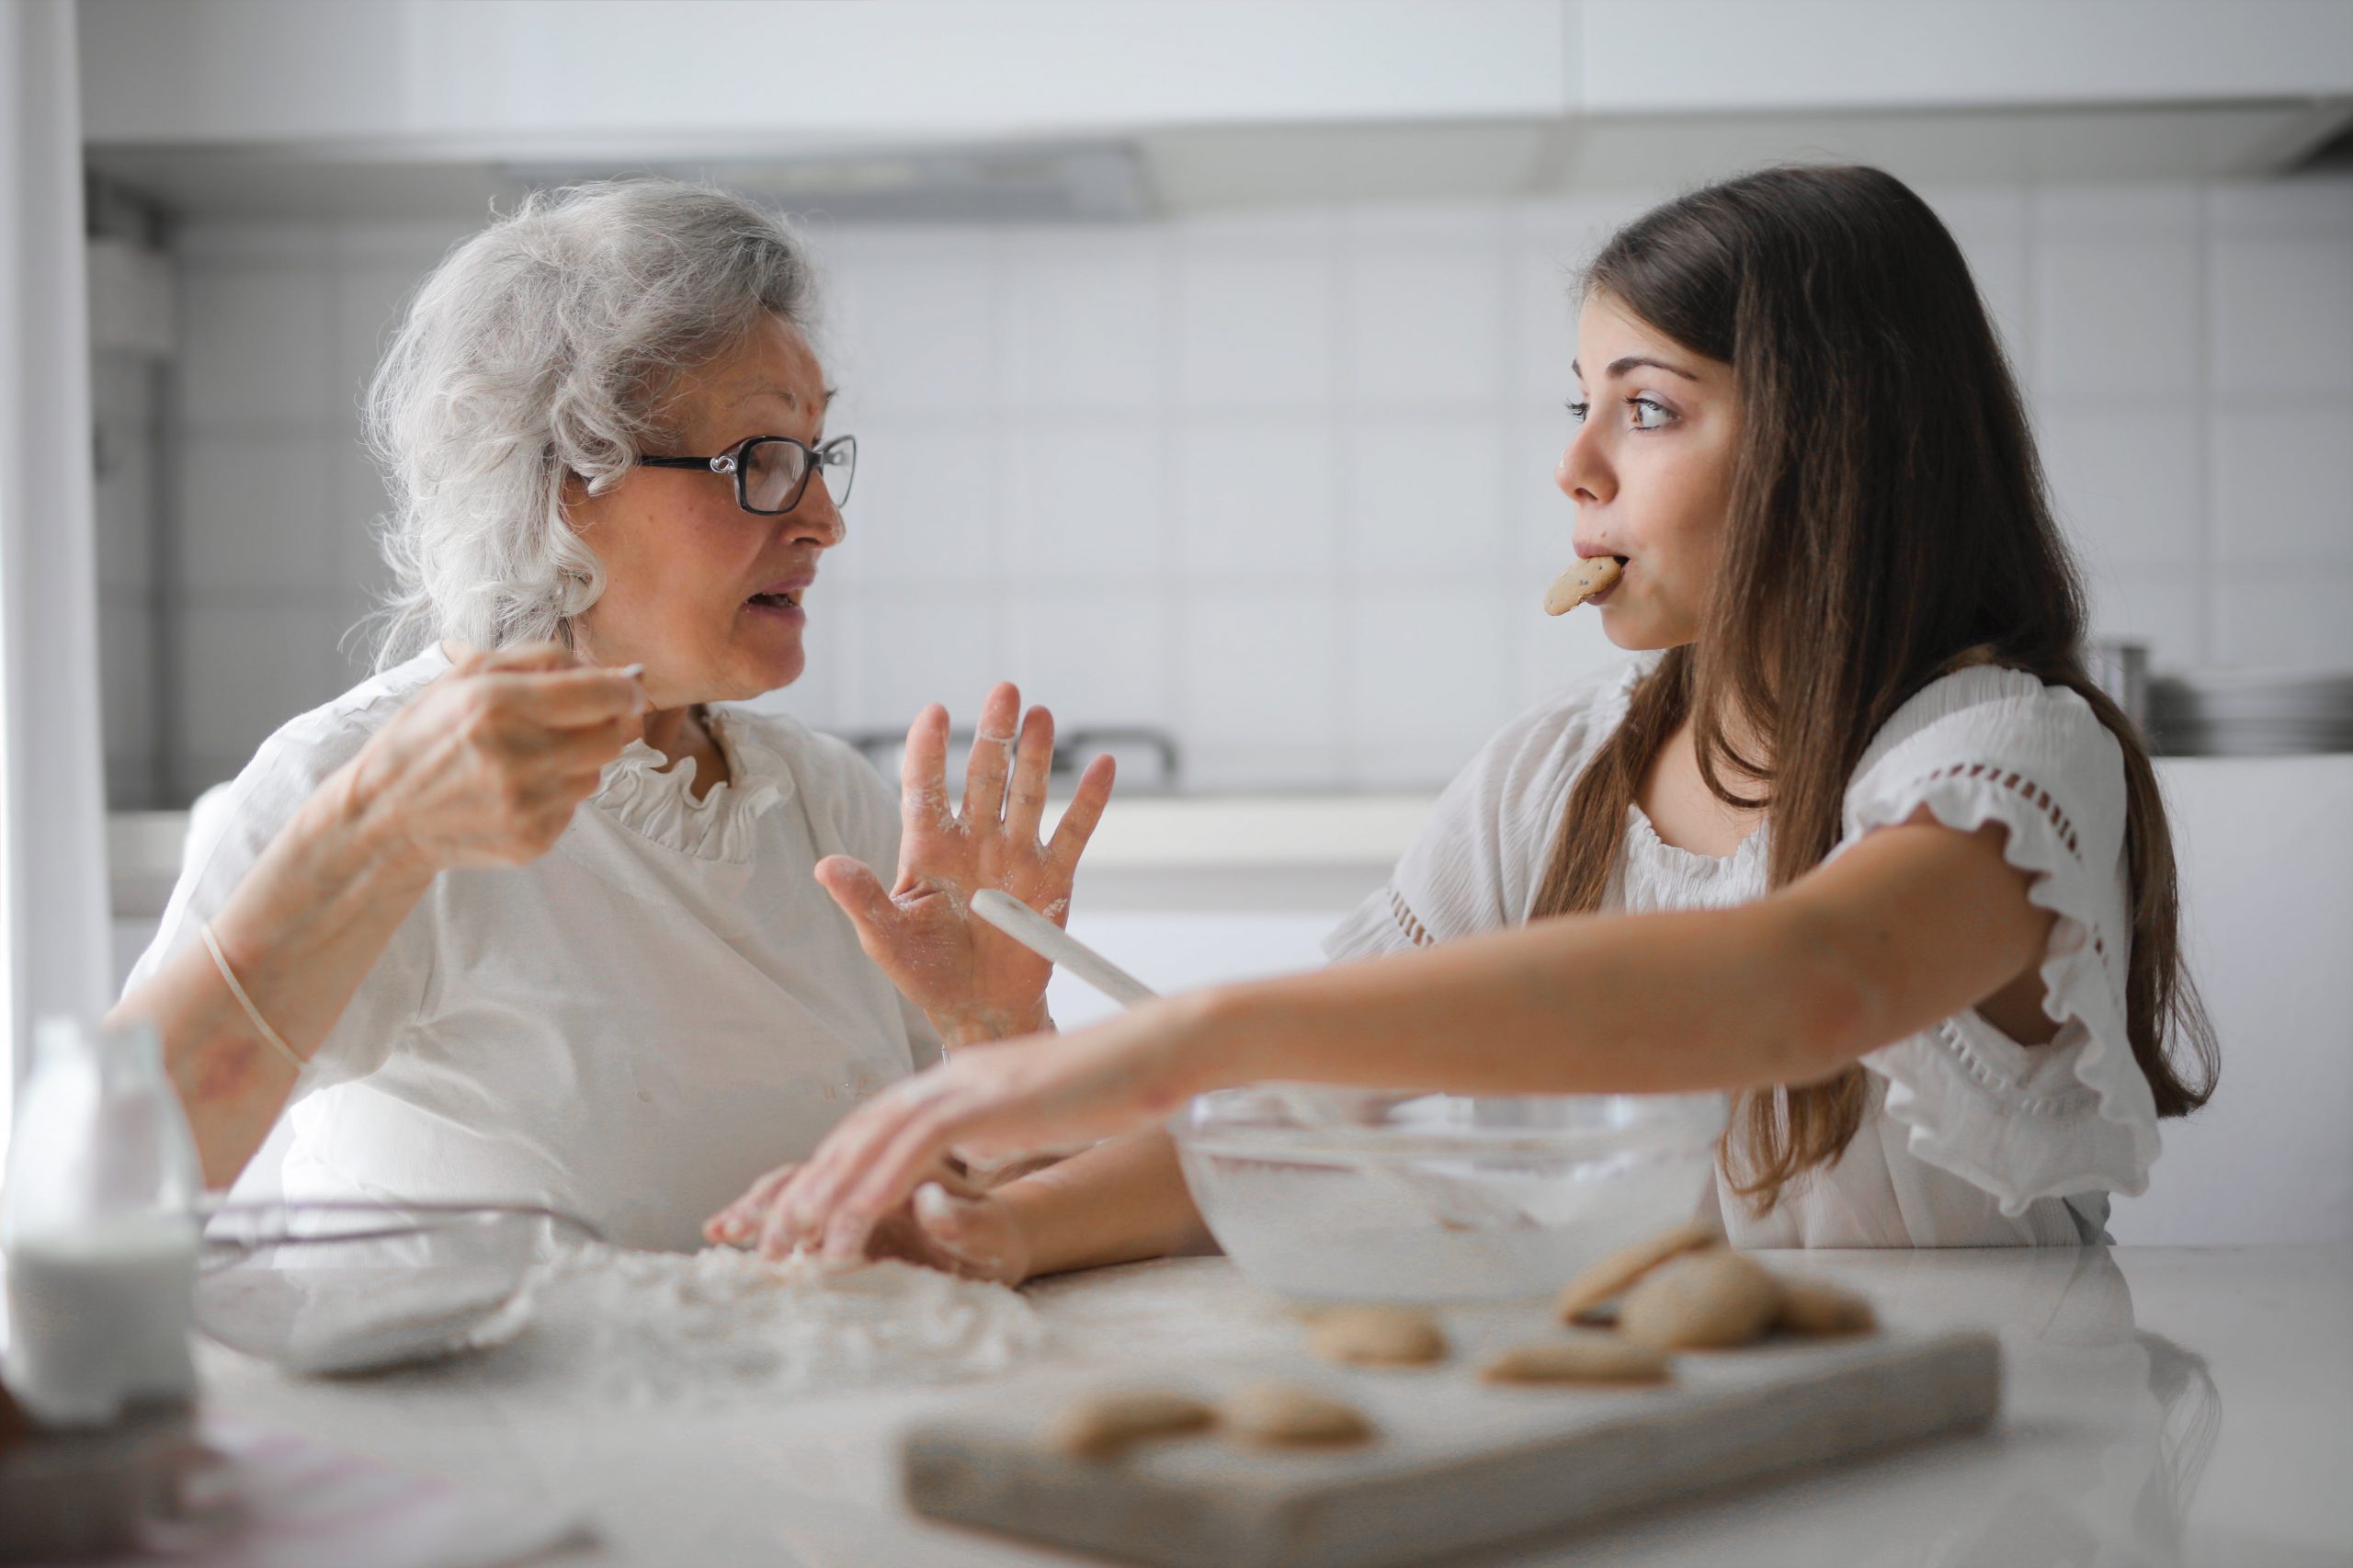 Grandmother and granddaughter baking together, talking and having fun in a bright kitchen. 